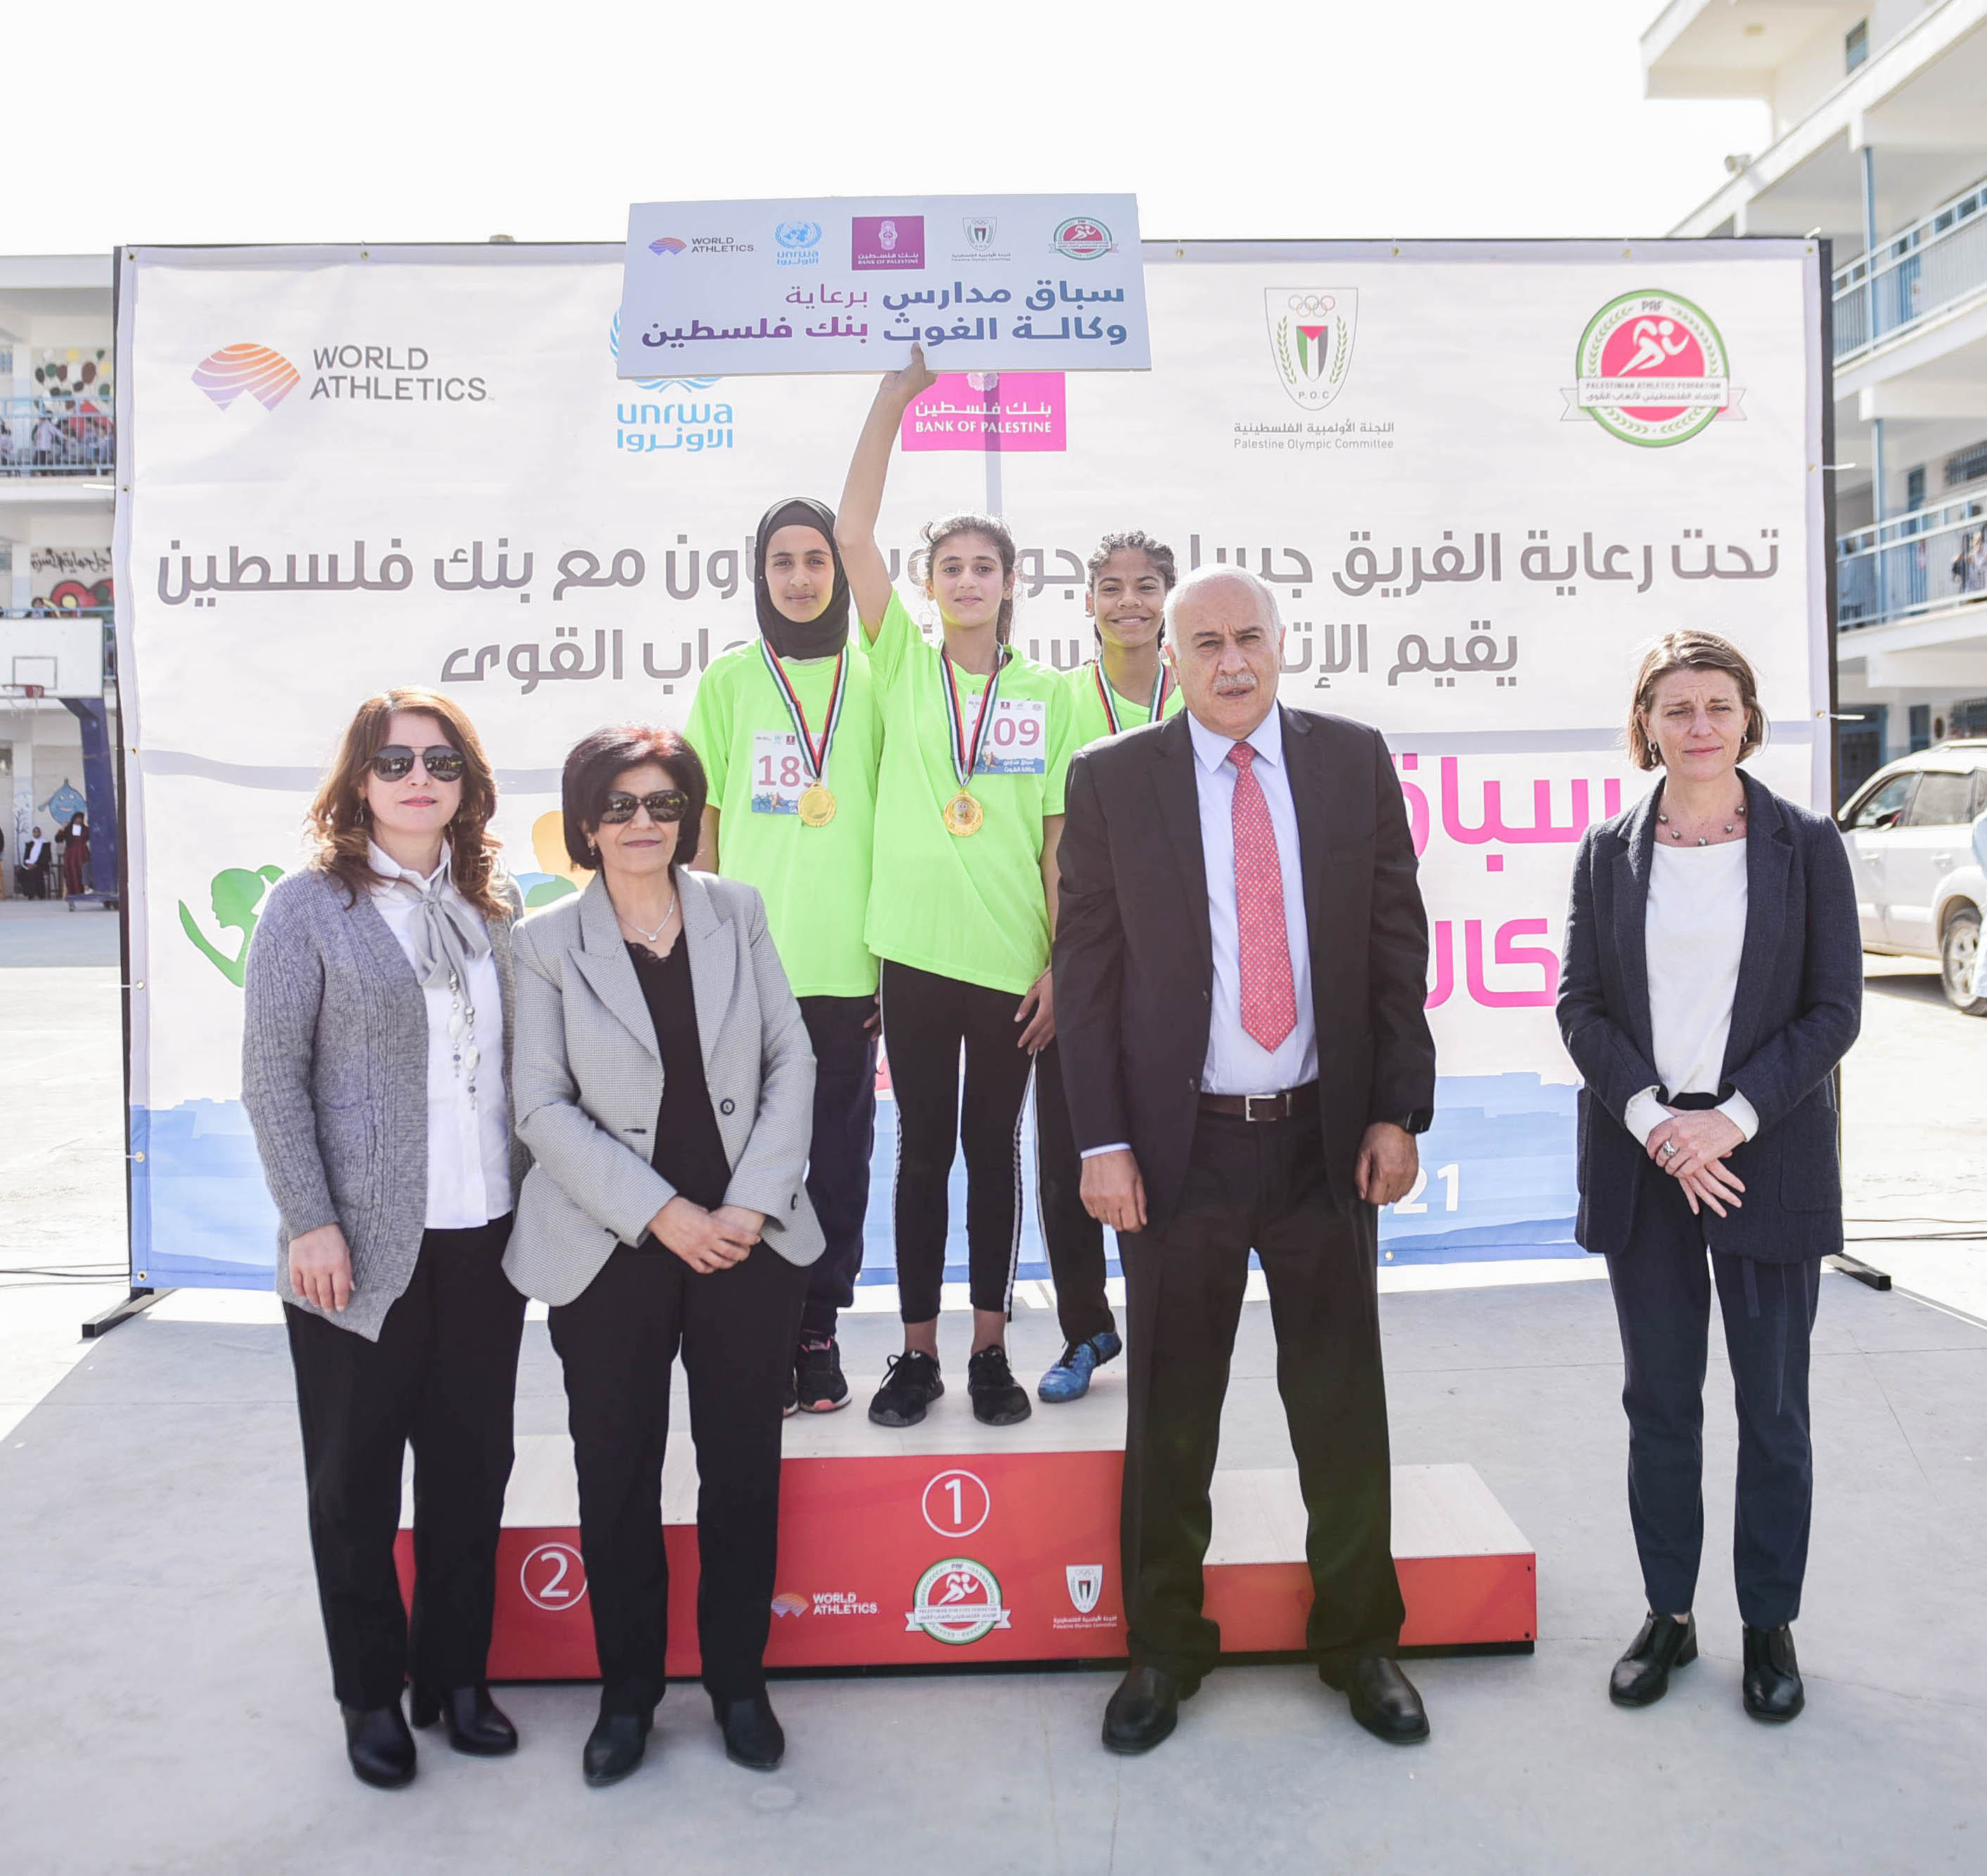 Bank of Palestine sponsors the first cross-country race for the UNRWA schools in Jericho